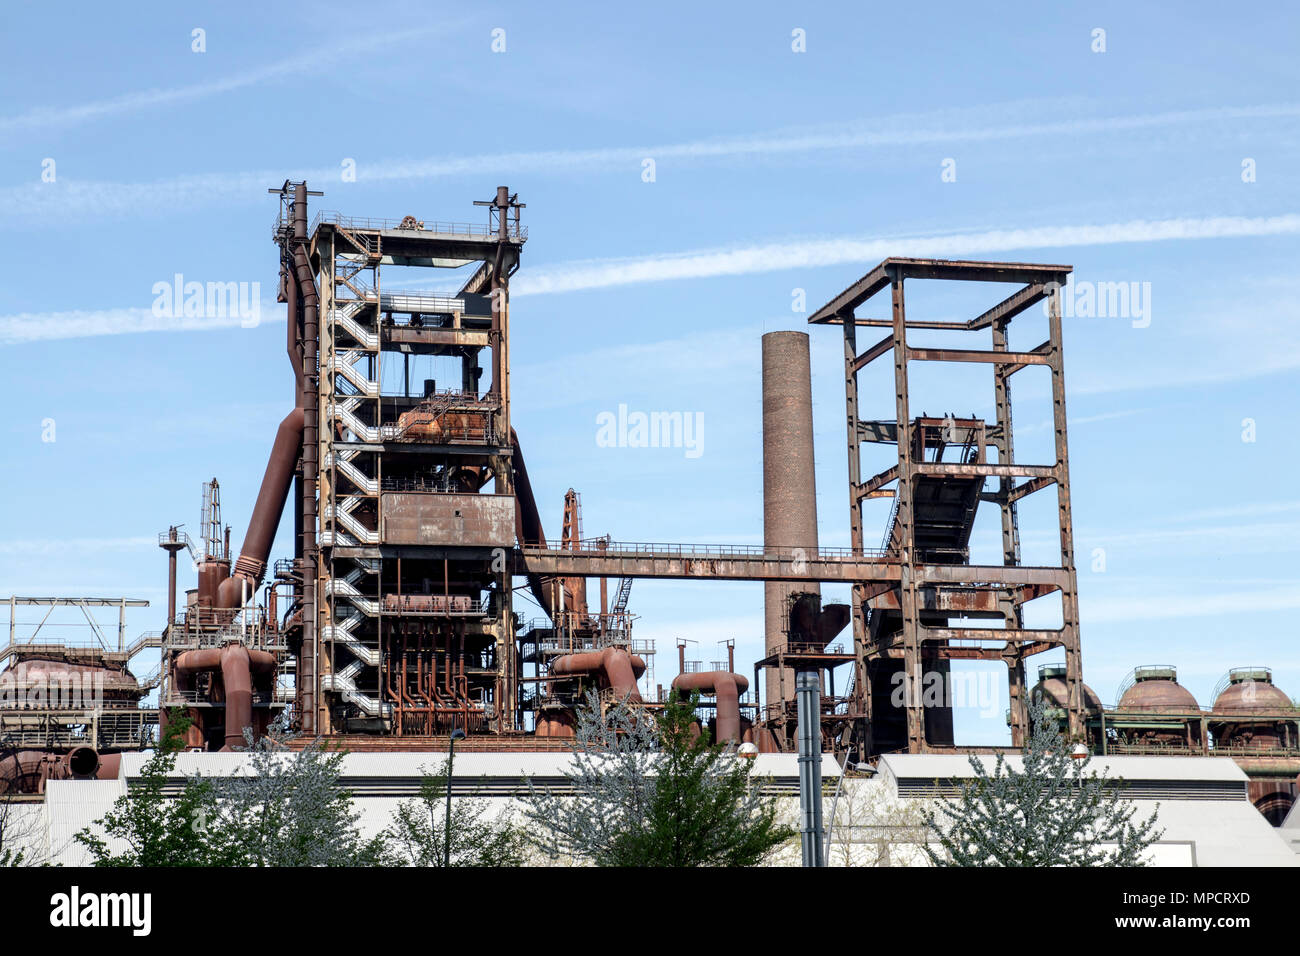 Dortmund, Ruhr Area, North Rhine Westphalia, Germany - April 16 2018: Blast Furnace Phoenix West at the route of industry culture Stock Photo